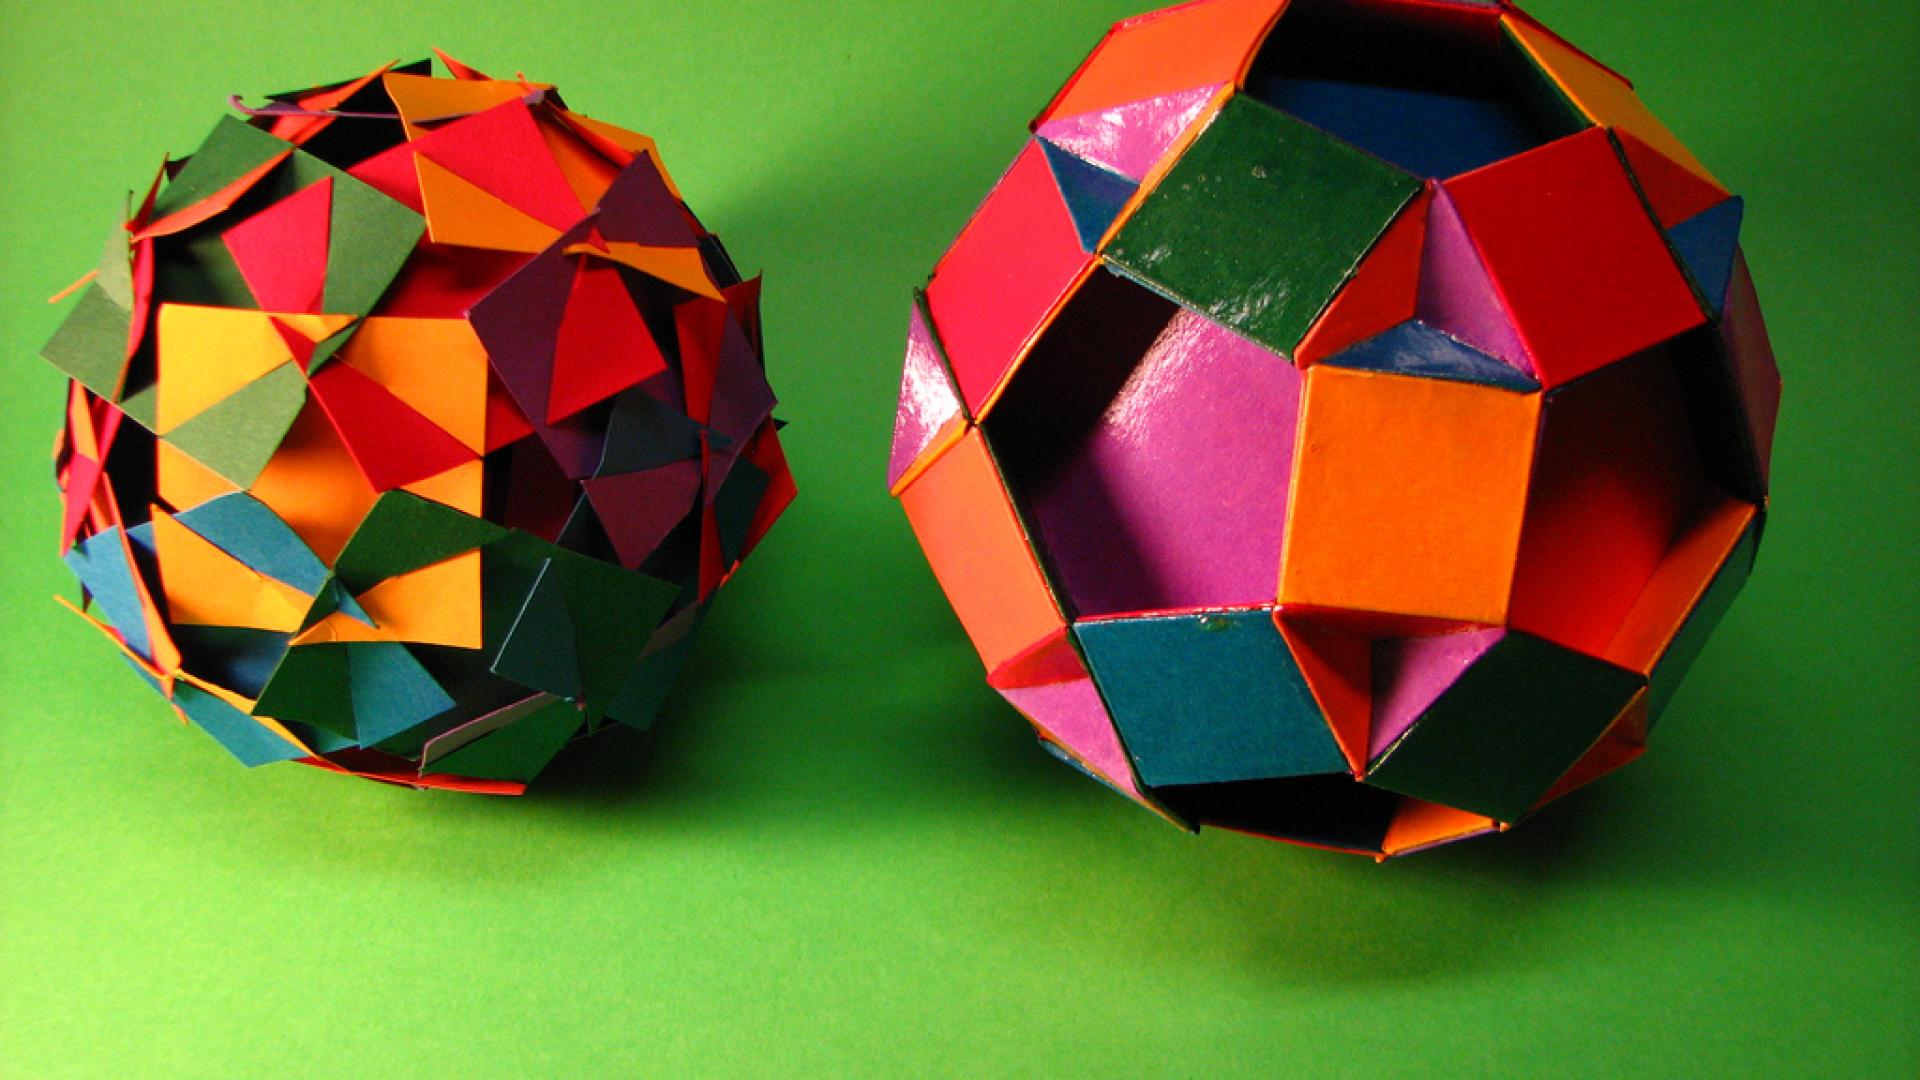 Two mulitcoloured rhombidodecahedrons